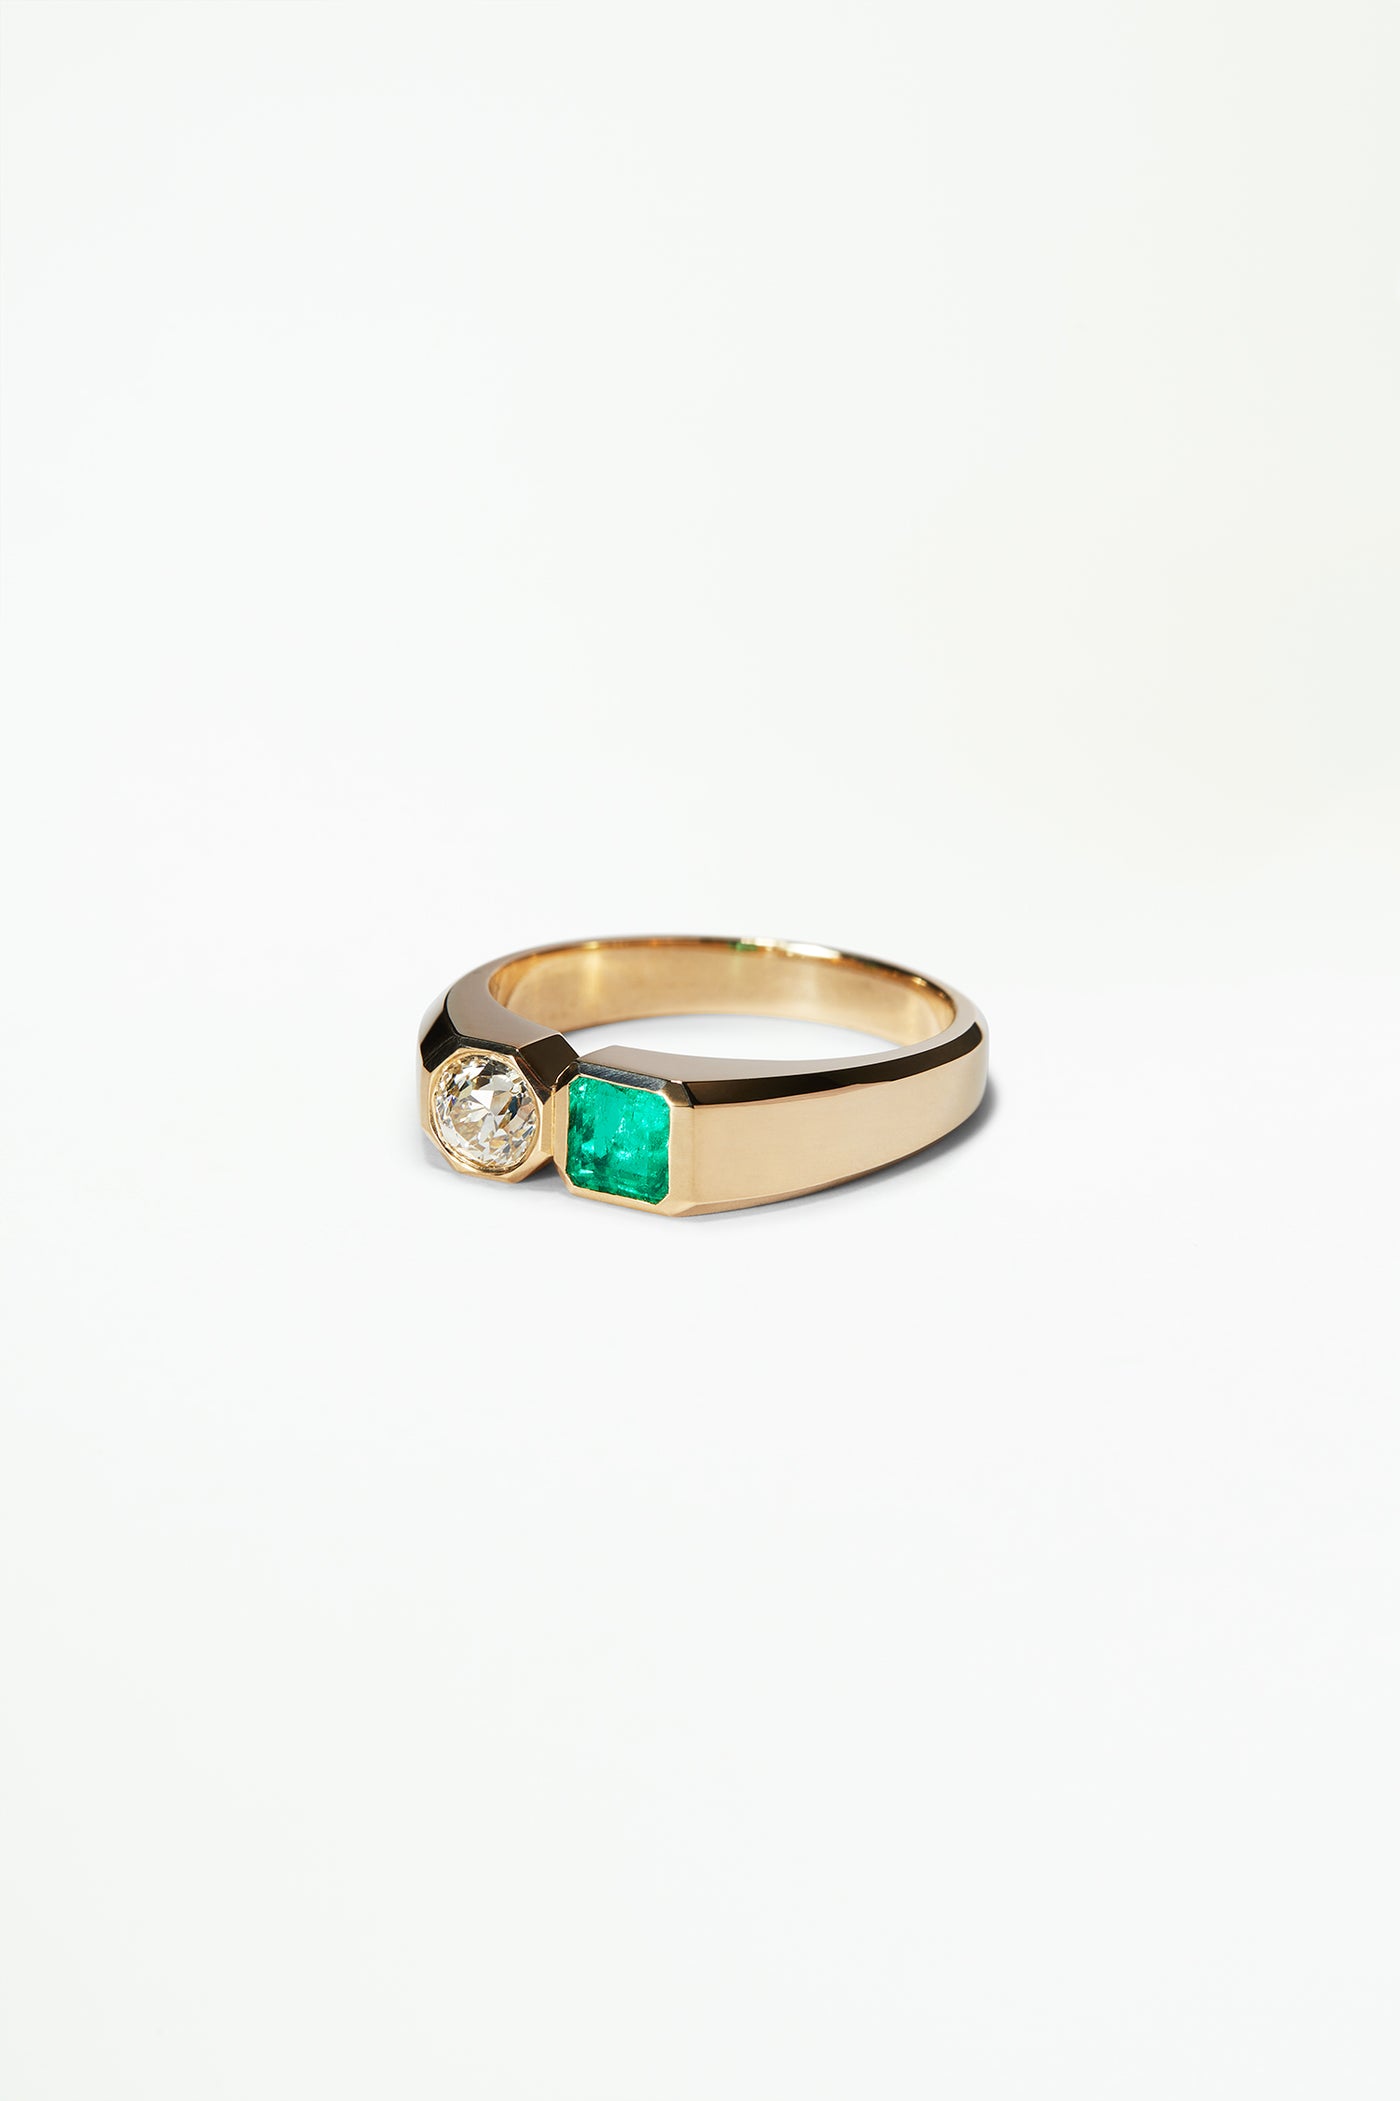 One of a Kind Dyad Signet Ring No. 4